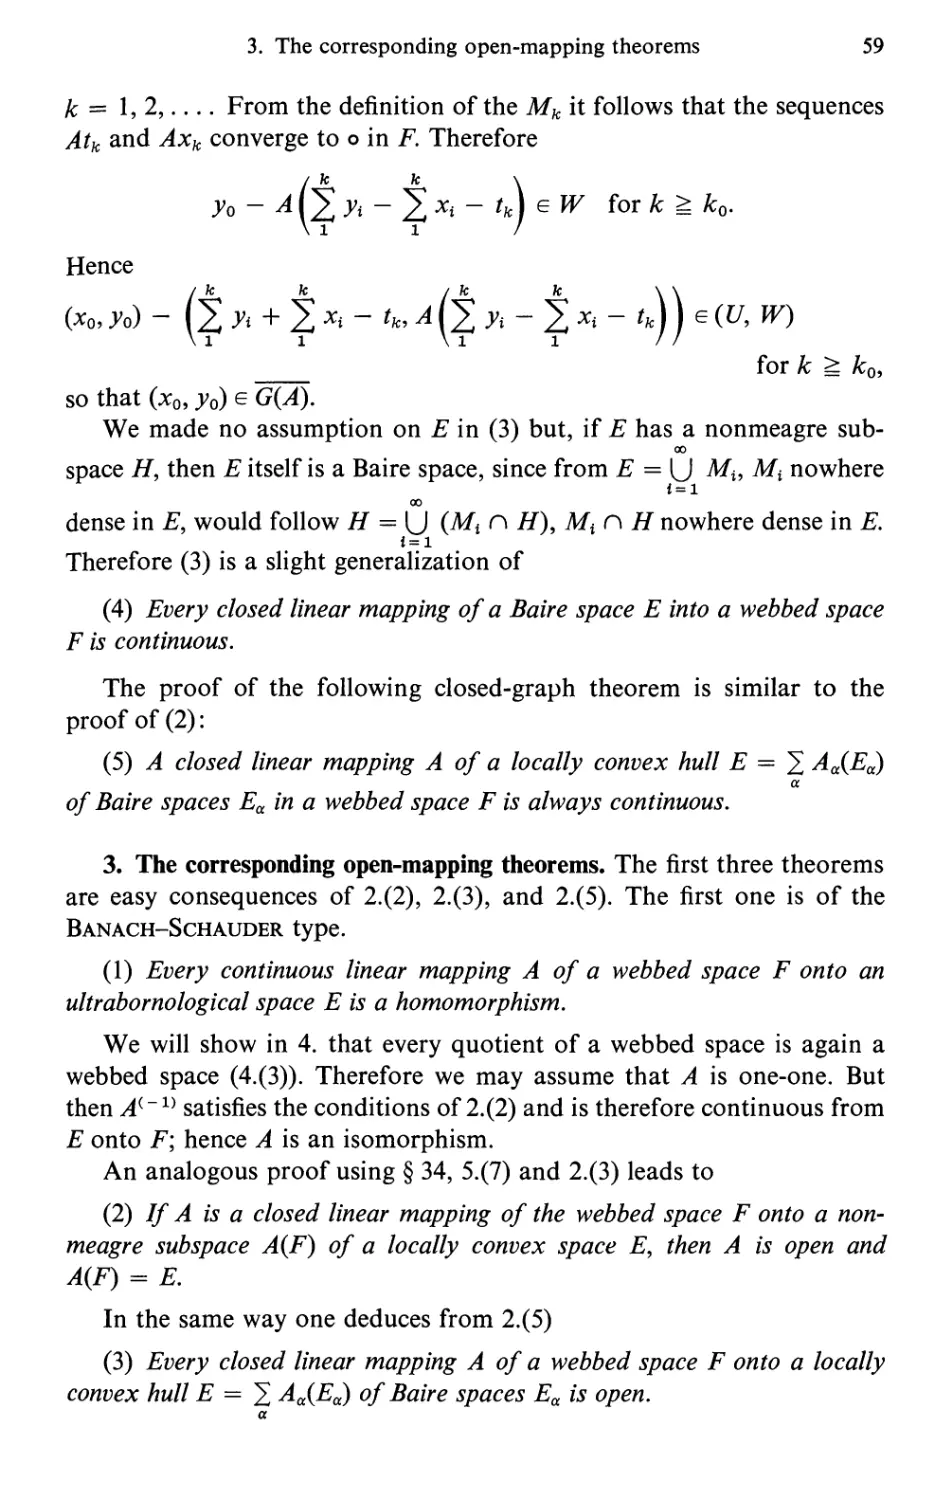 3. The corresponding open-mapping theorems